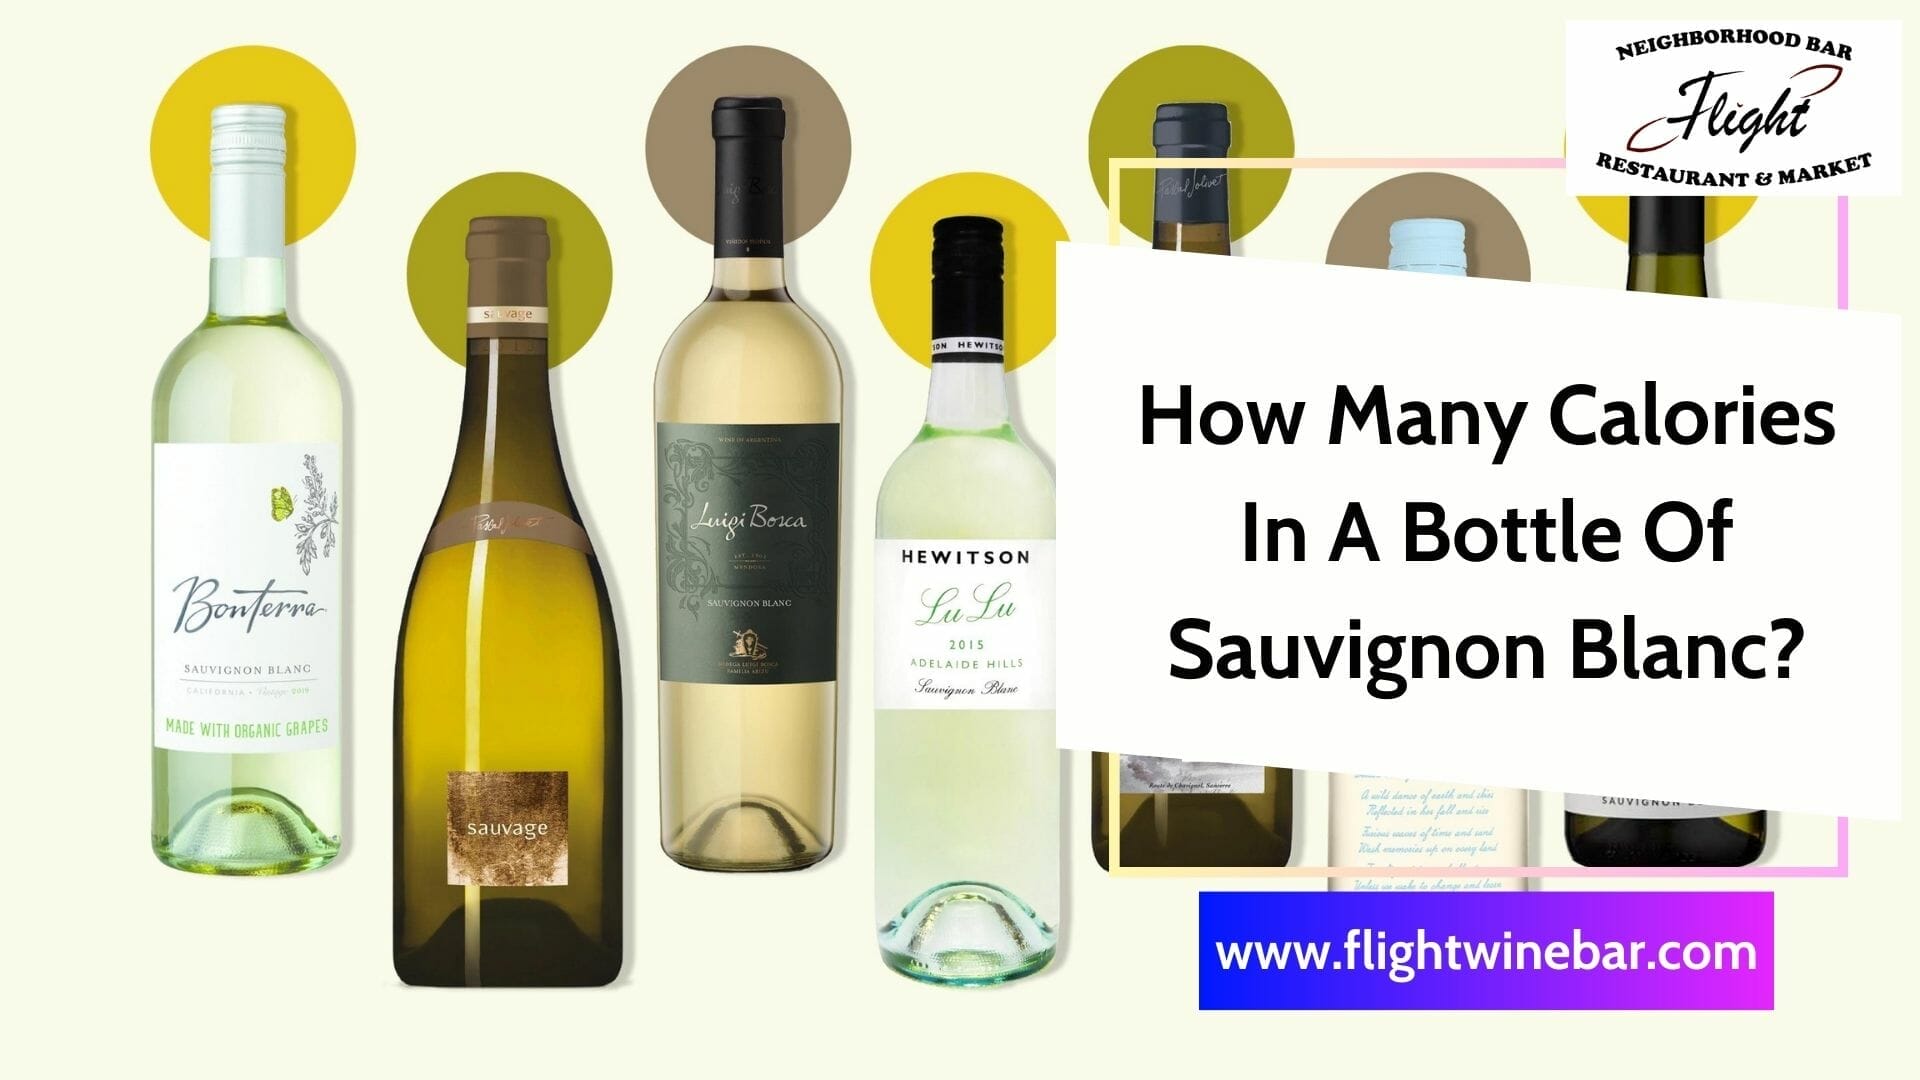 How Many Calories In A Bottle Of Sauvignon Blanc